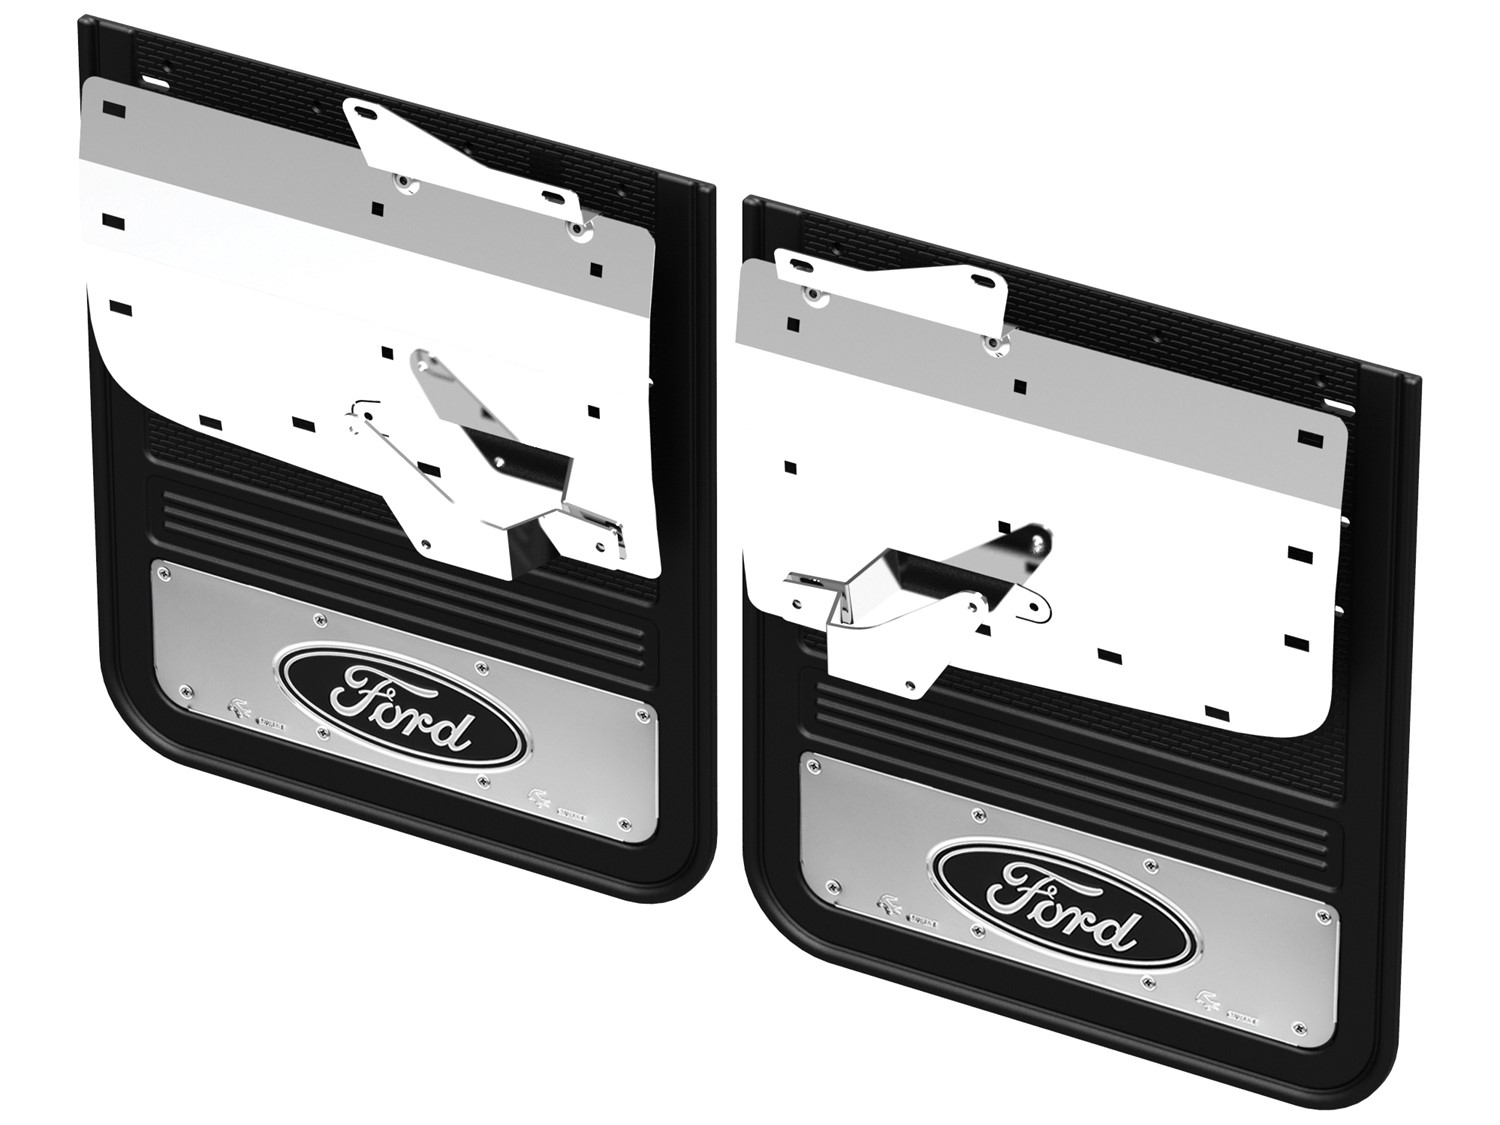 Image for Splash Guards - Gatorback by Truck Hardware, Rear Pair, DRW w/Black Ford Oval and Stainless Surround from AccessoriesCanada